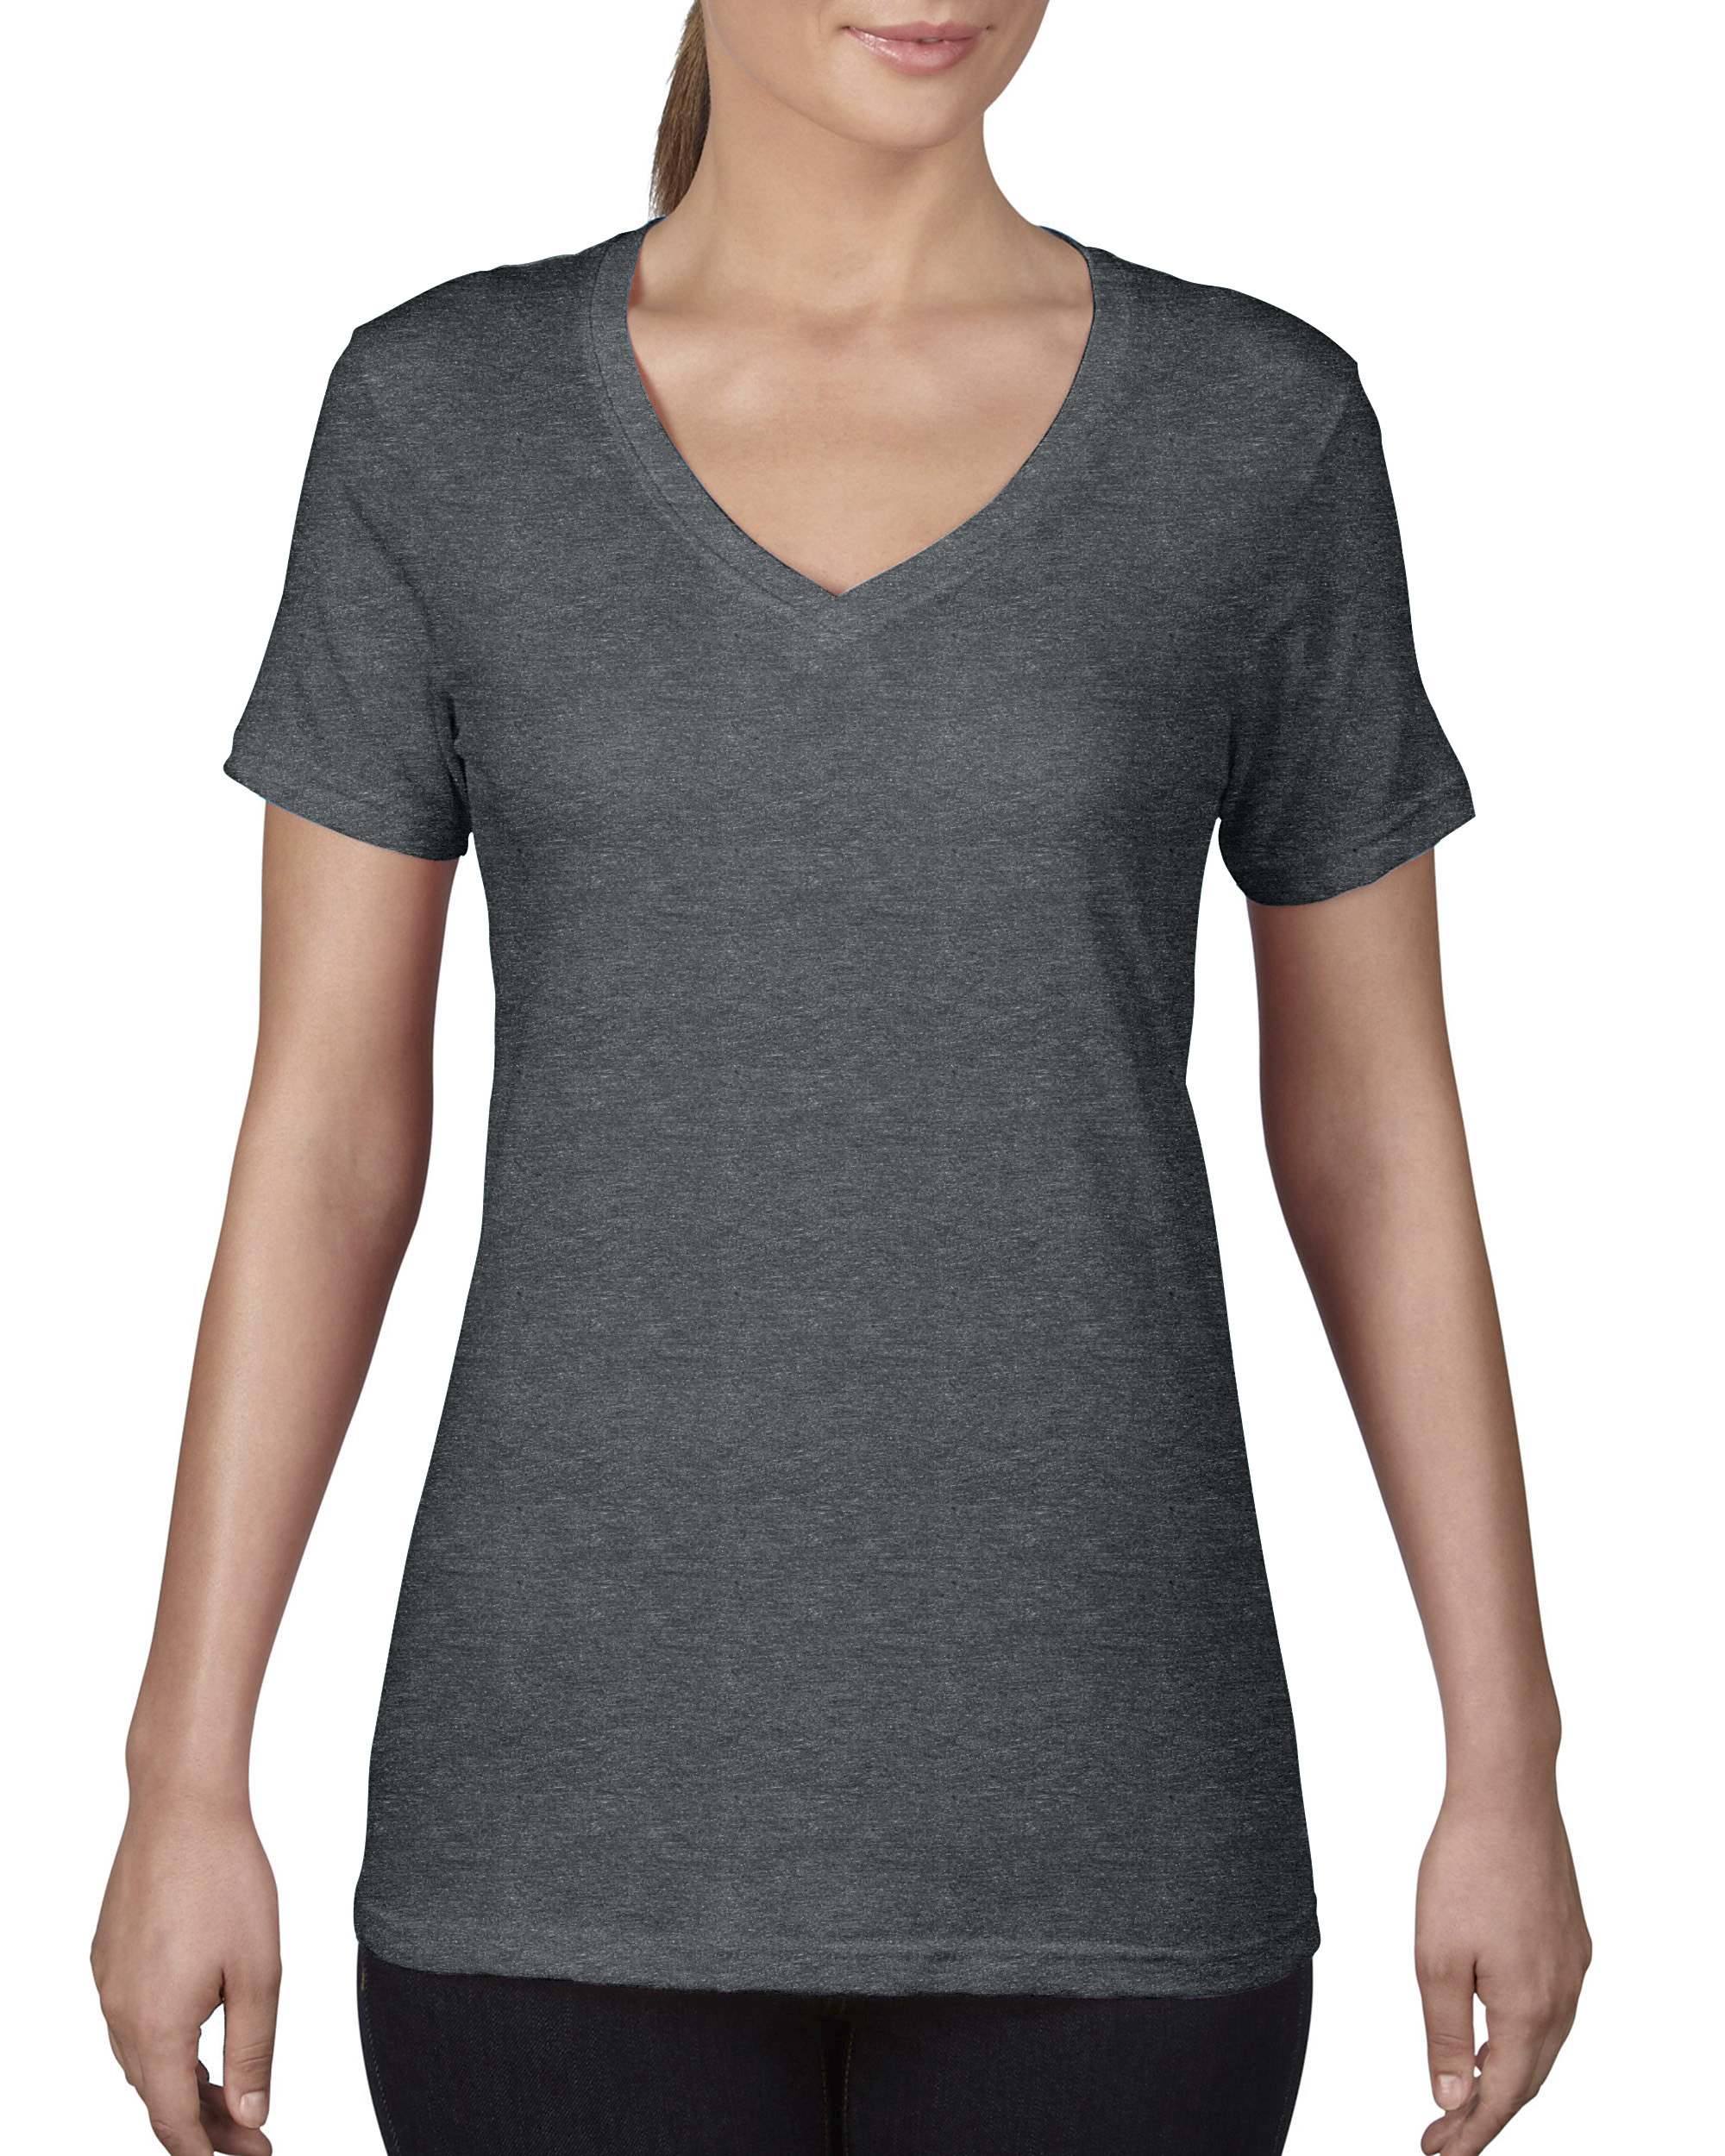 AN031 - Women's Featherweight V-Neck Tee - One Stop